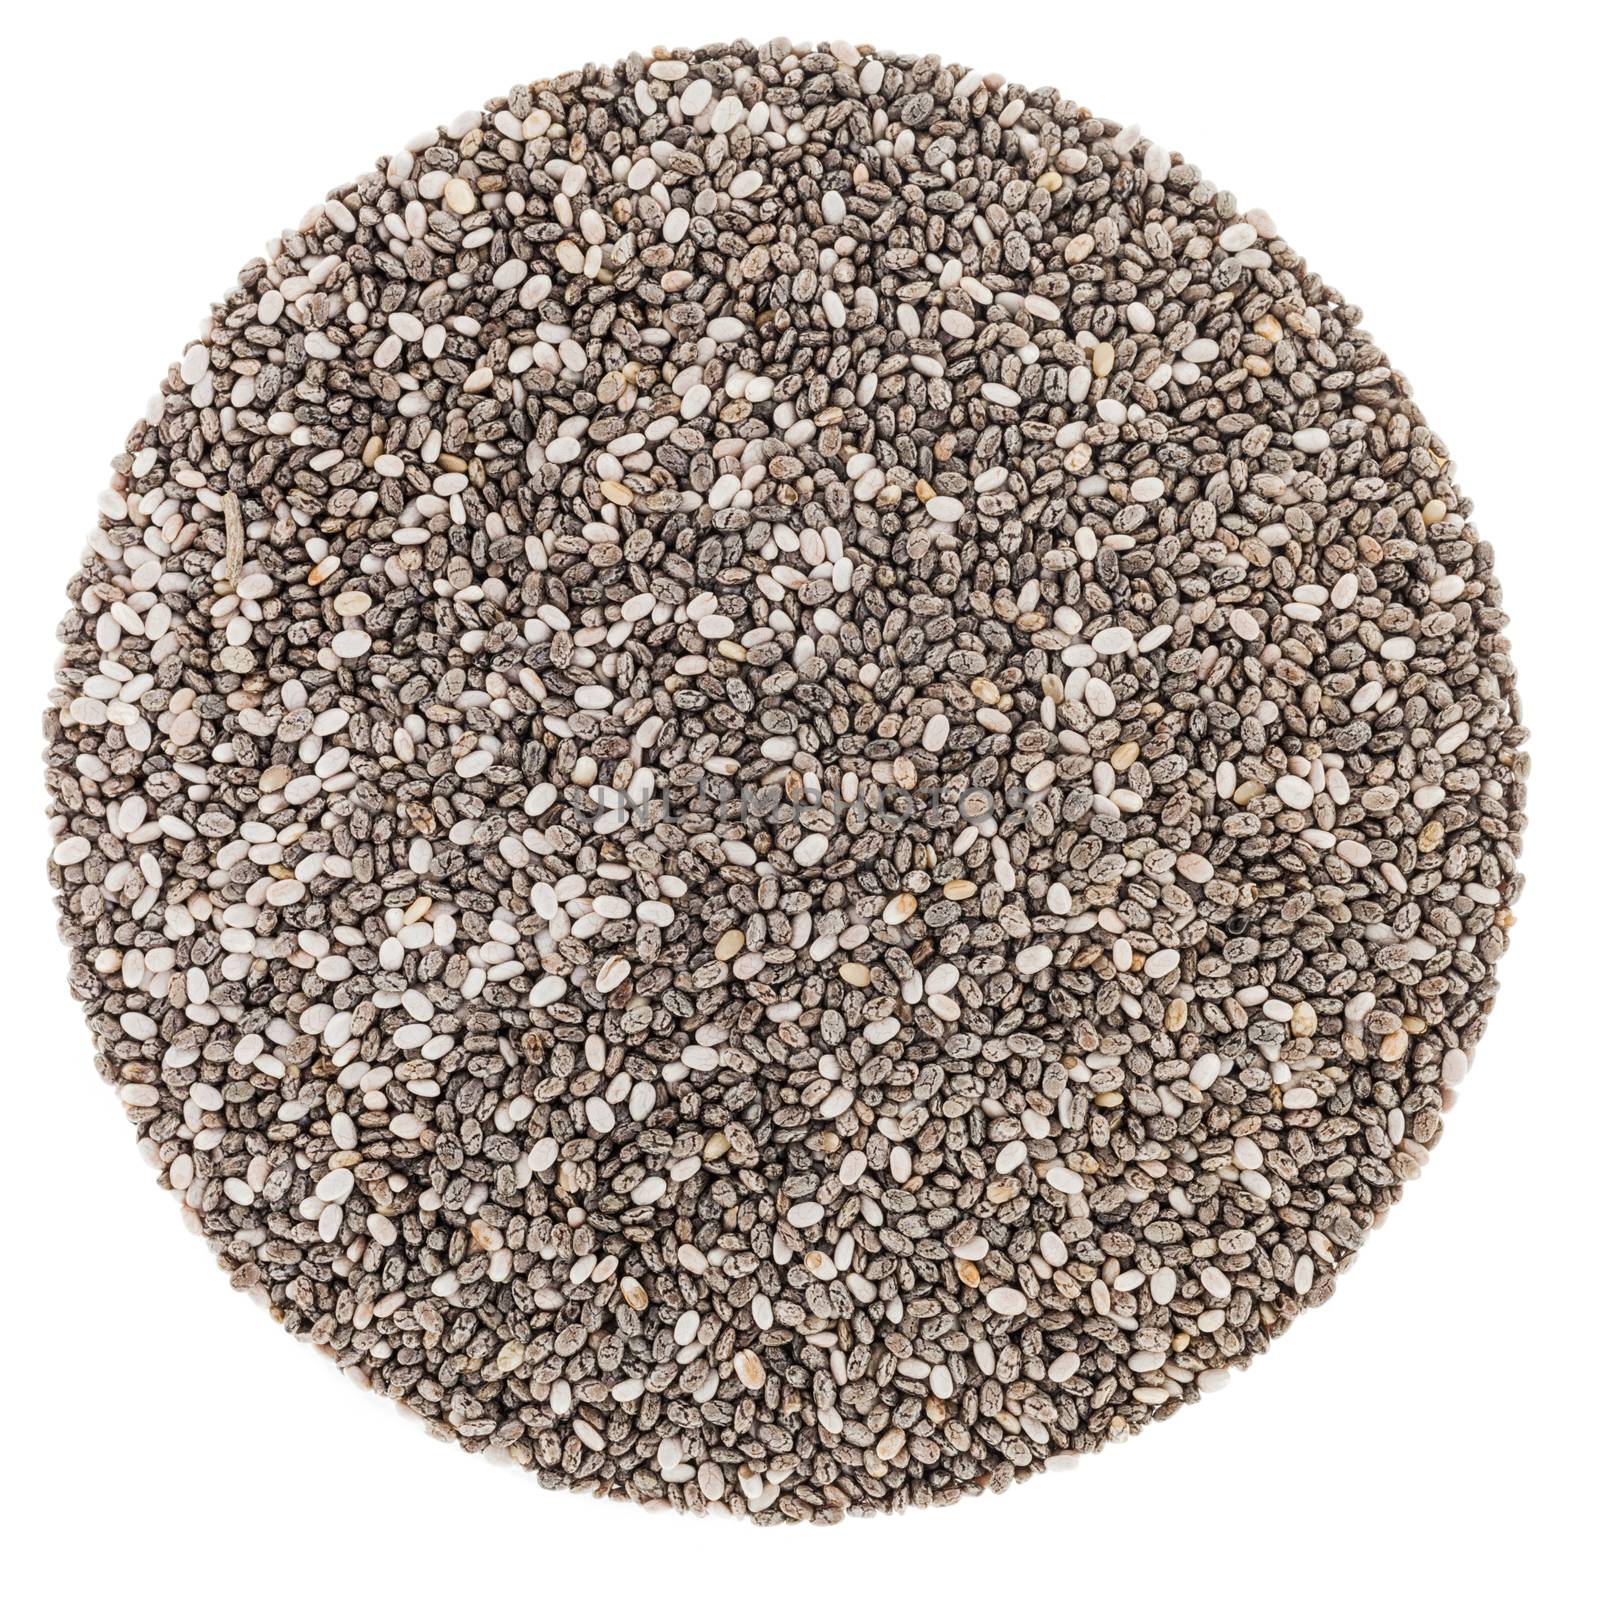 Circle of Chia Seeds Isolated on White Background by aetb